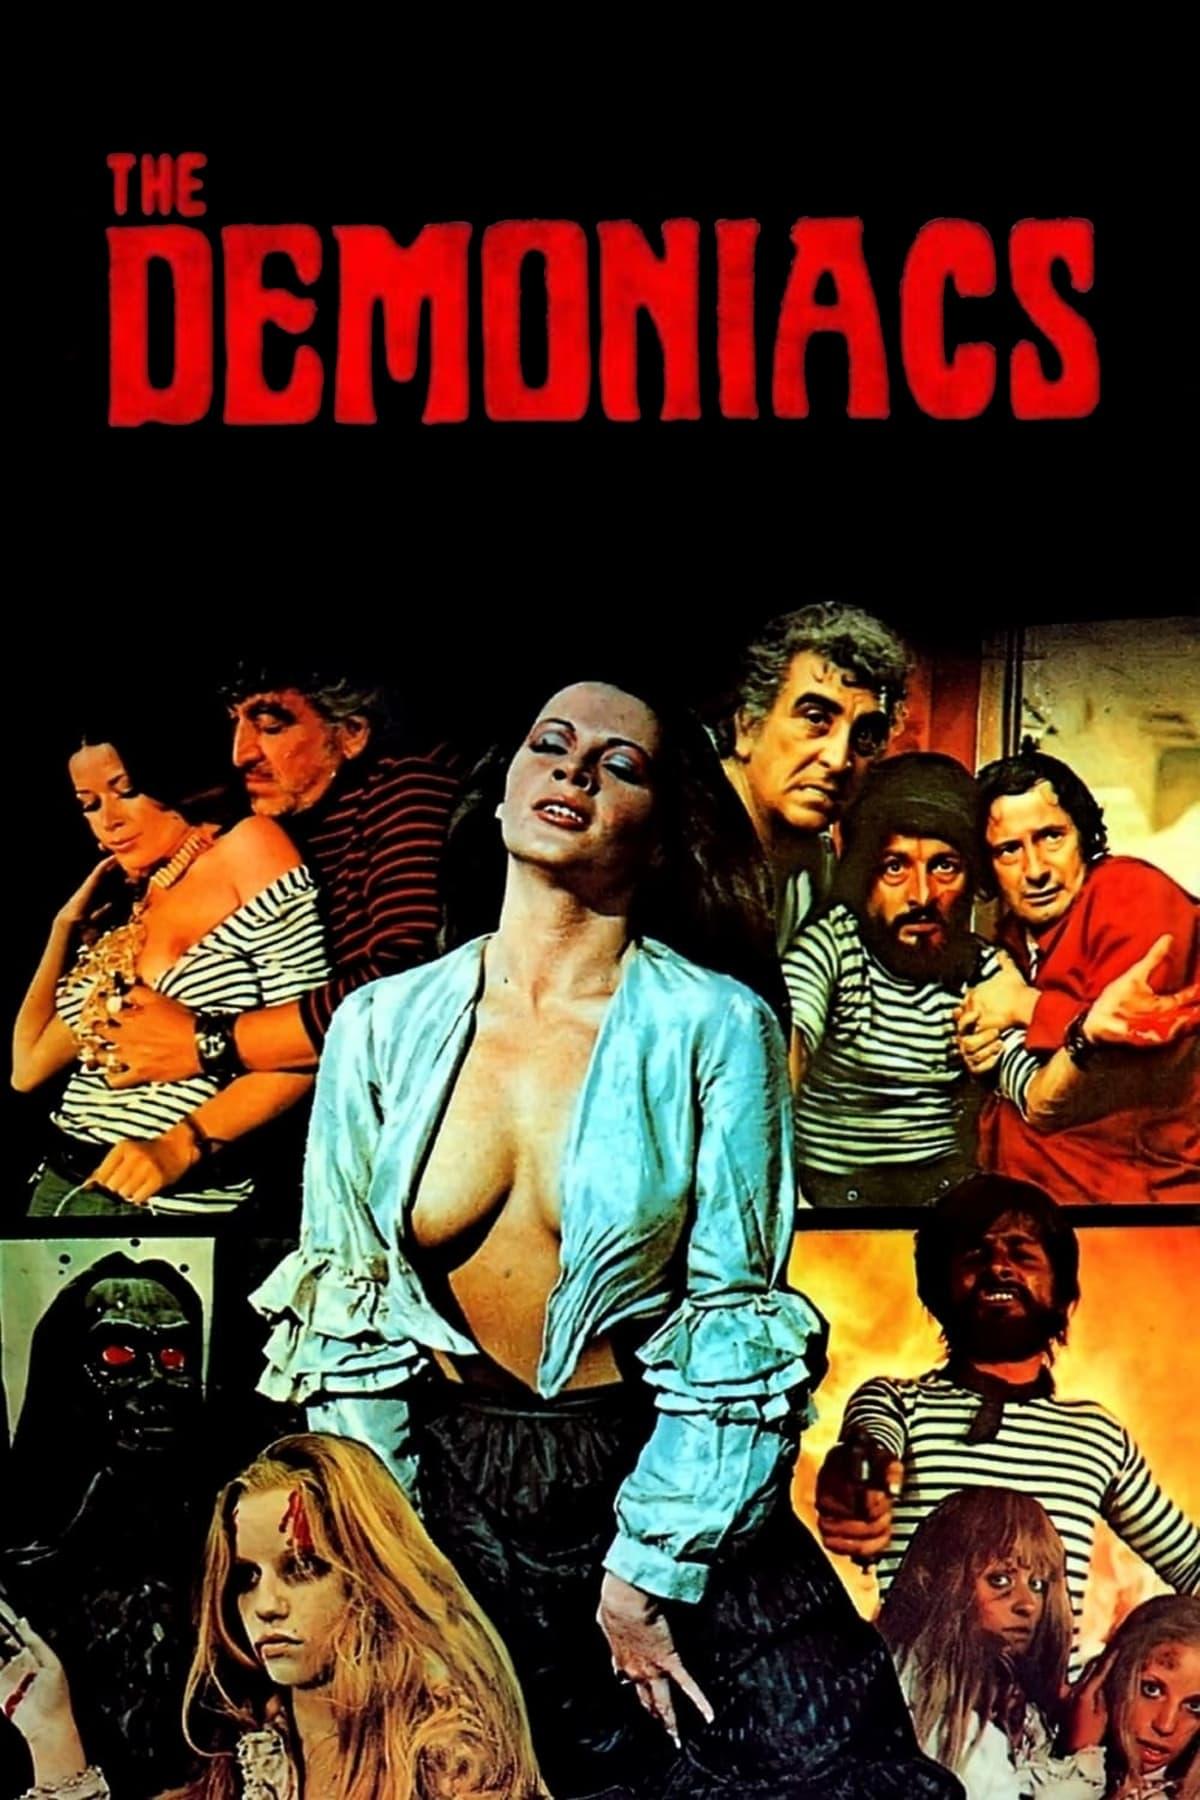 The Demoniacs poster